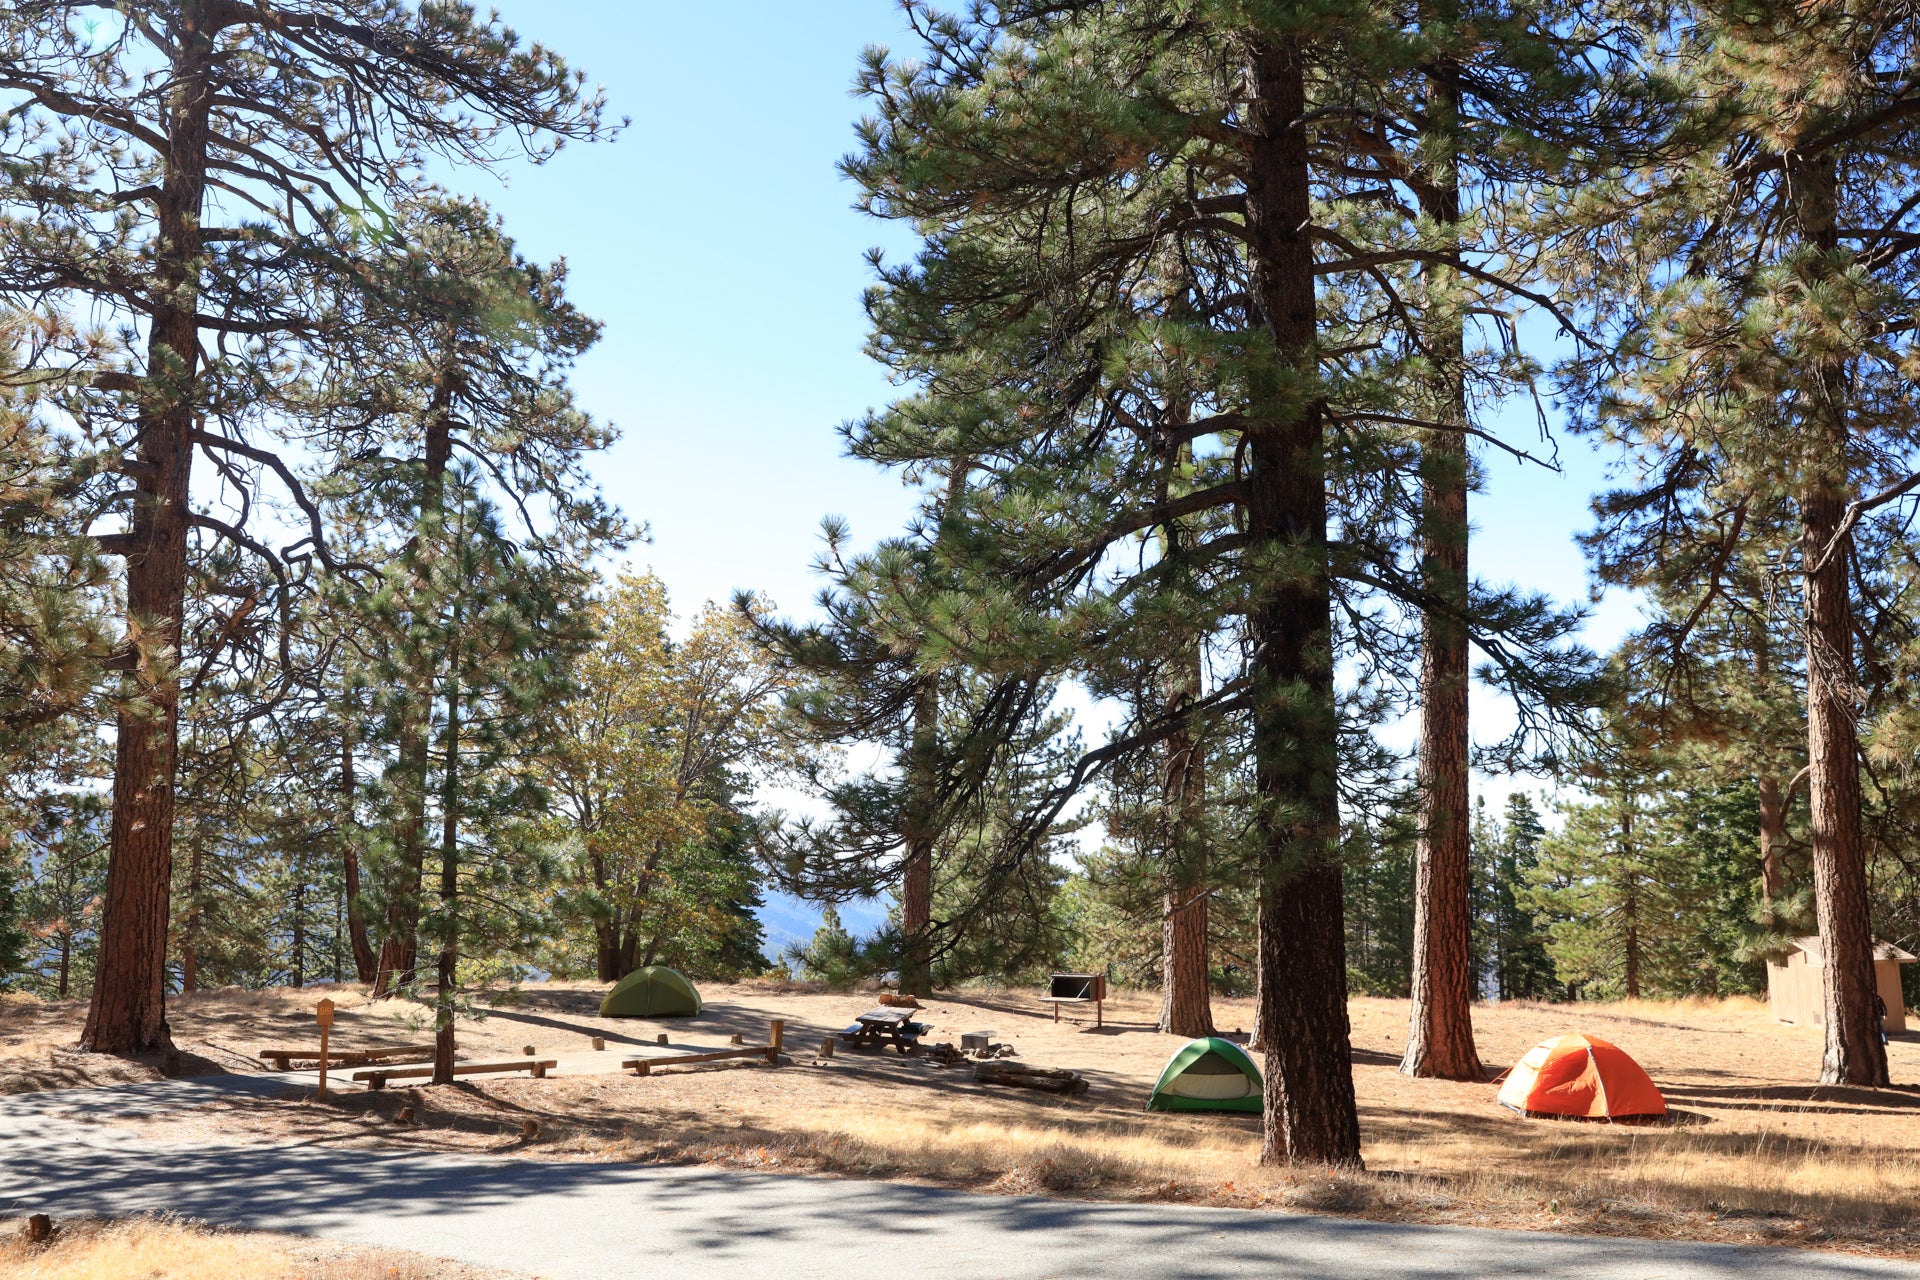 Eight Great Camping Sites Near Los Angeles | Discover Los Angeles